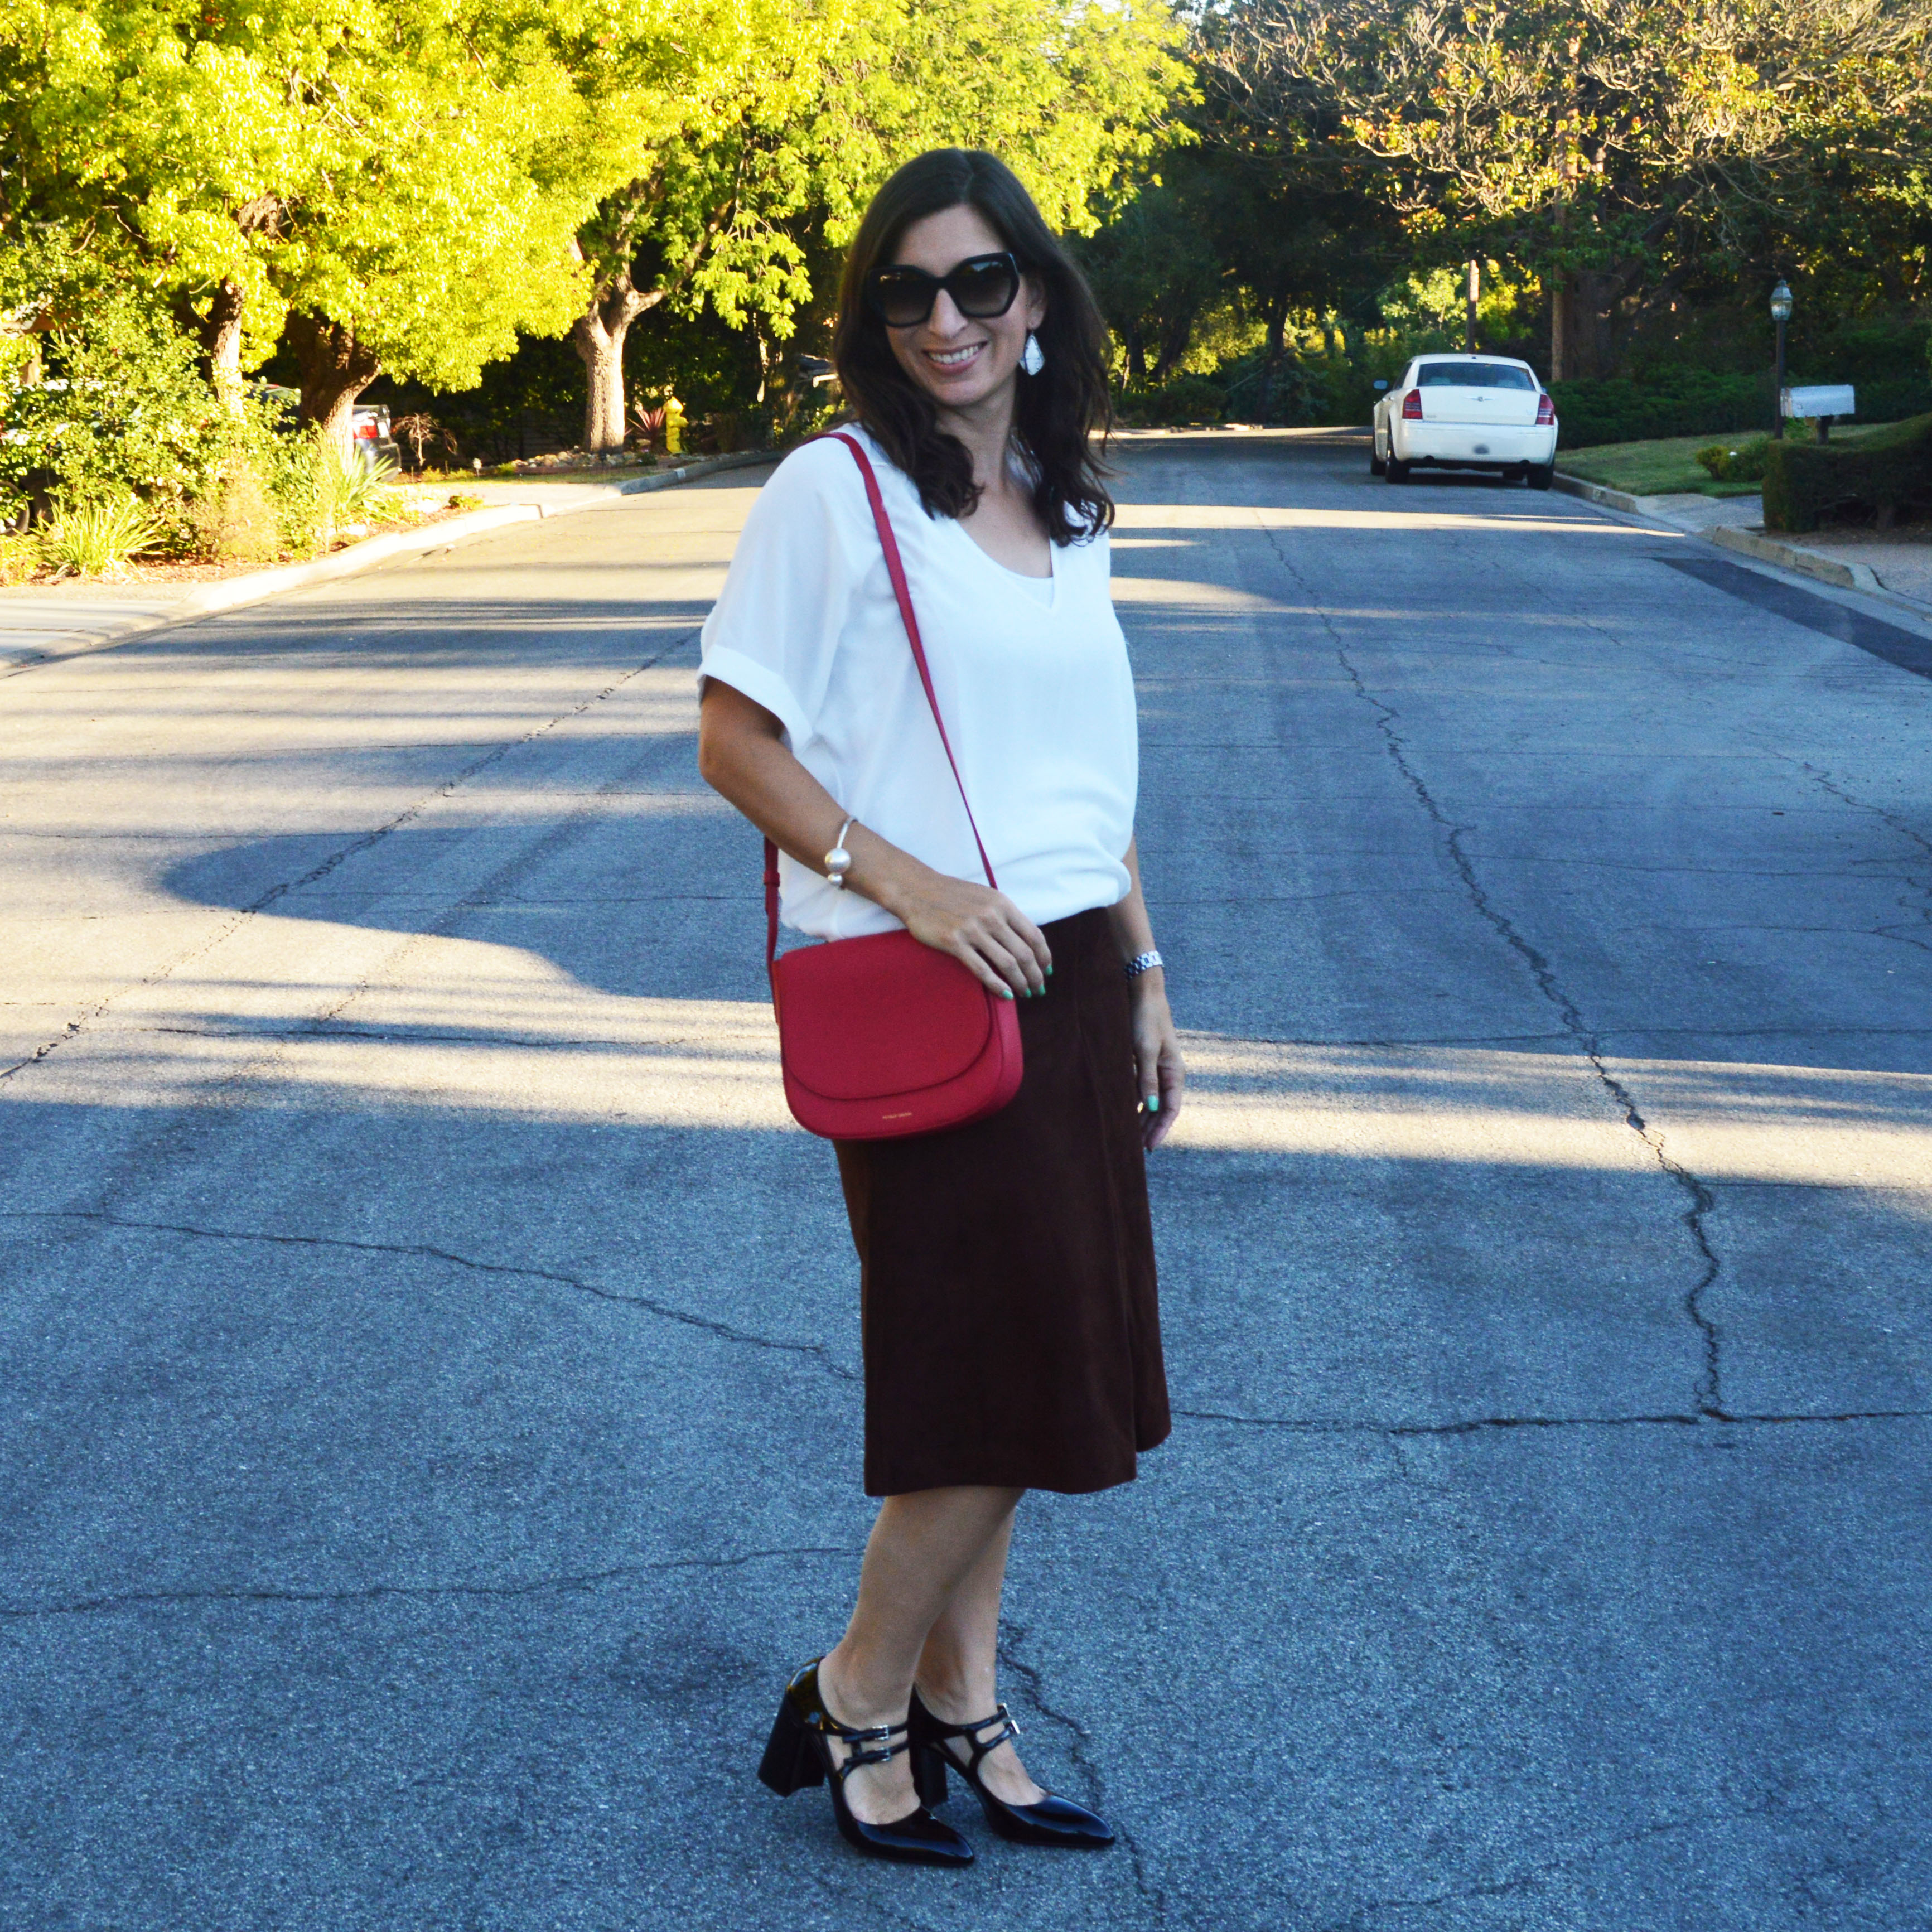 70s style suede skirt for fall – Bay Area Fashionista